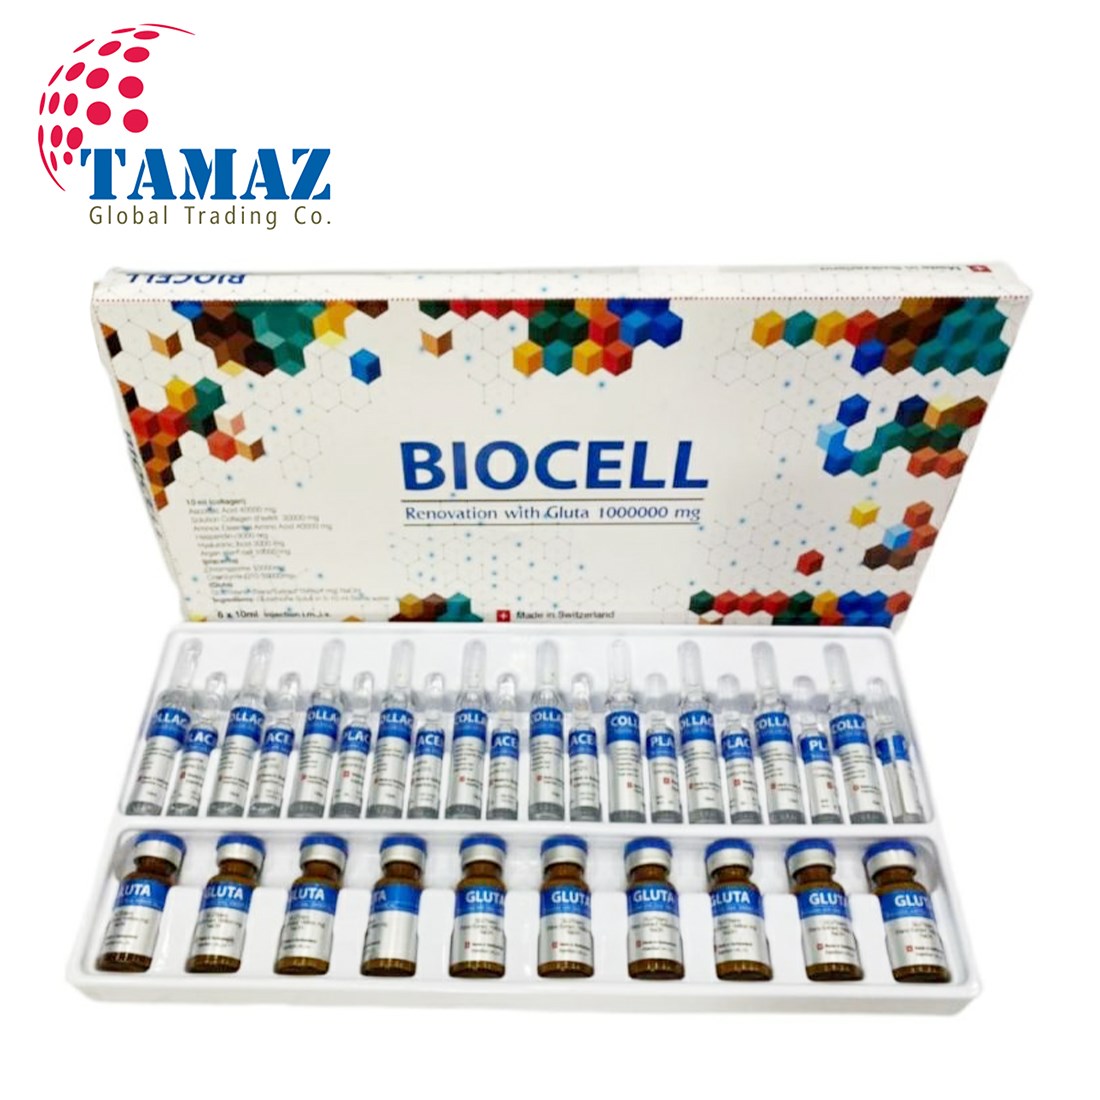 Biocell Renovation With Gluta 1000000mg